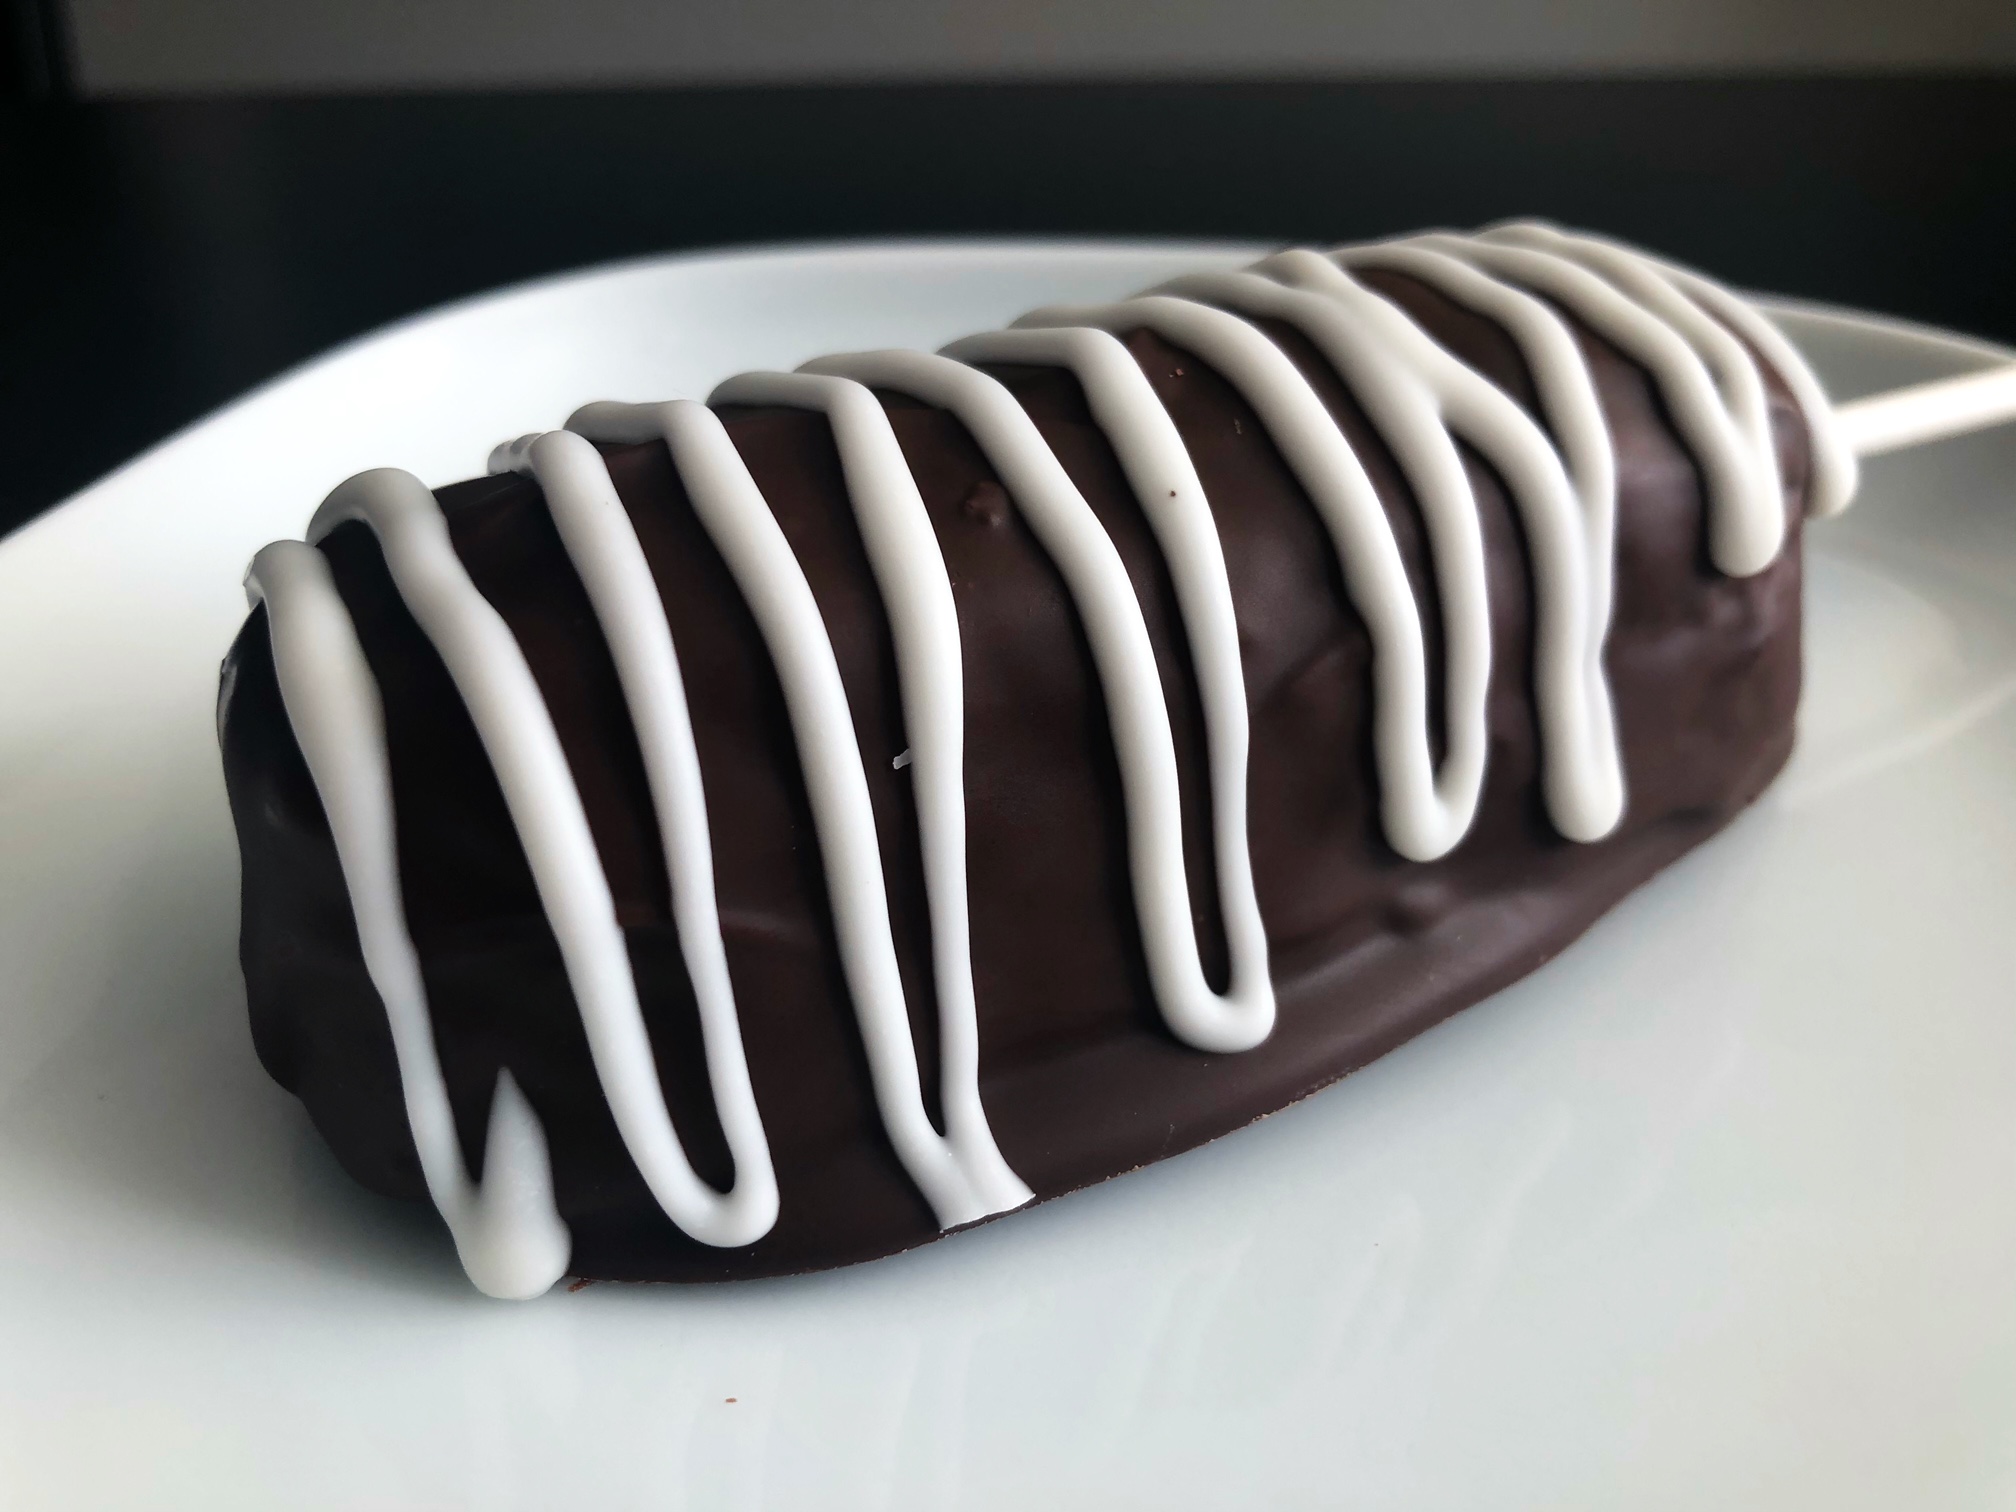 A chocolate covered Twinkie is drizzled with white chocolate and laying on a white plate. There is a white stick for easy holding. Photo by Alyssa Buckley.